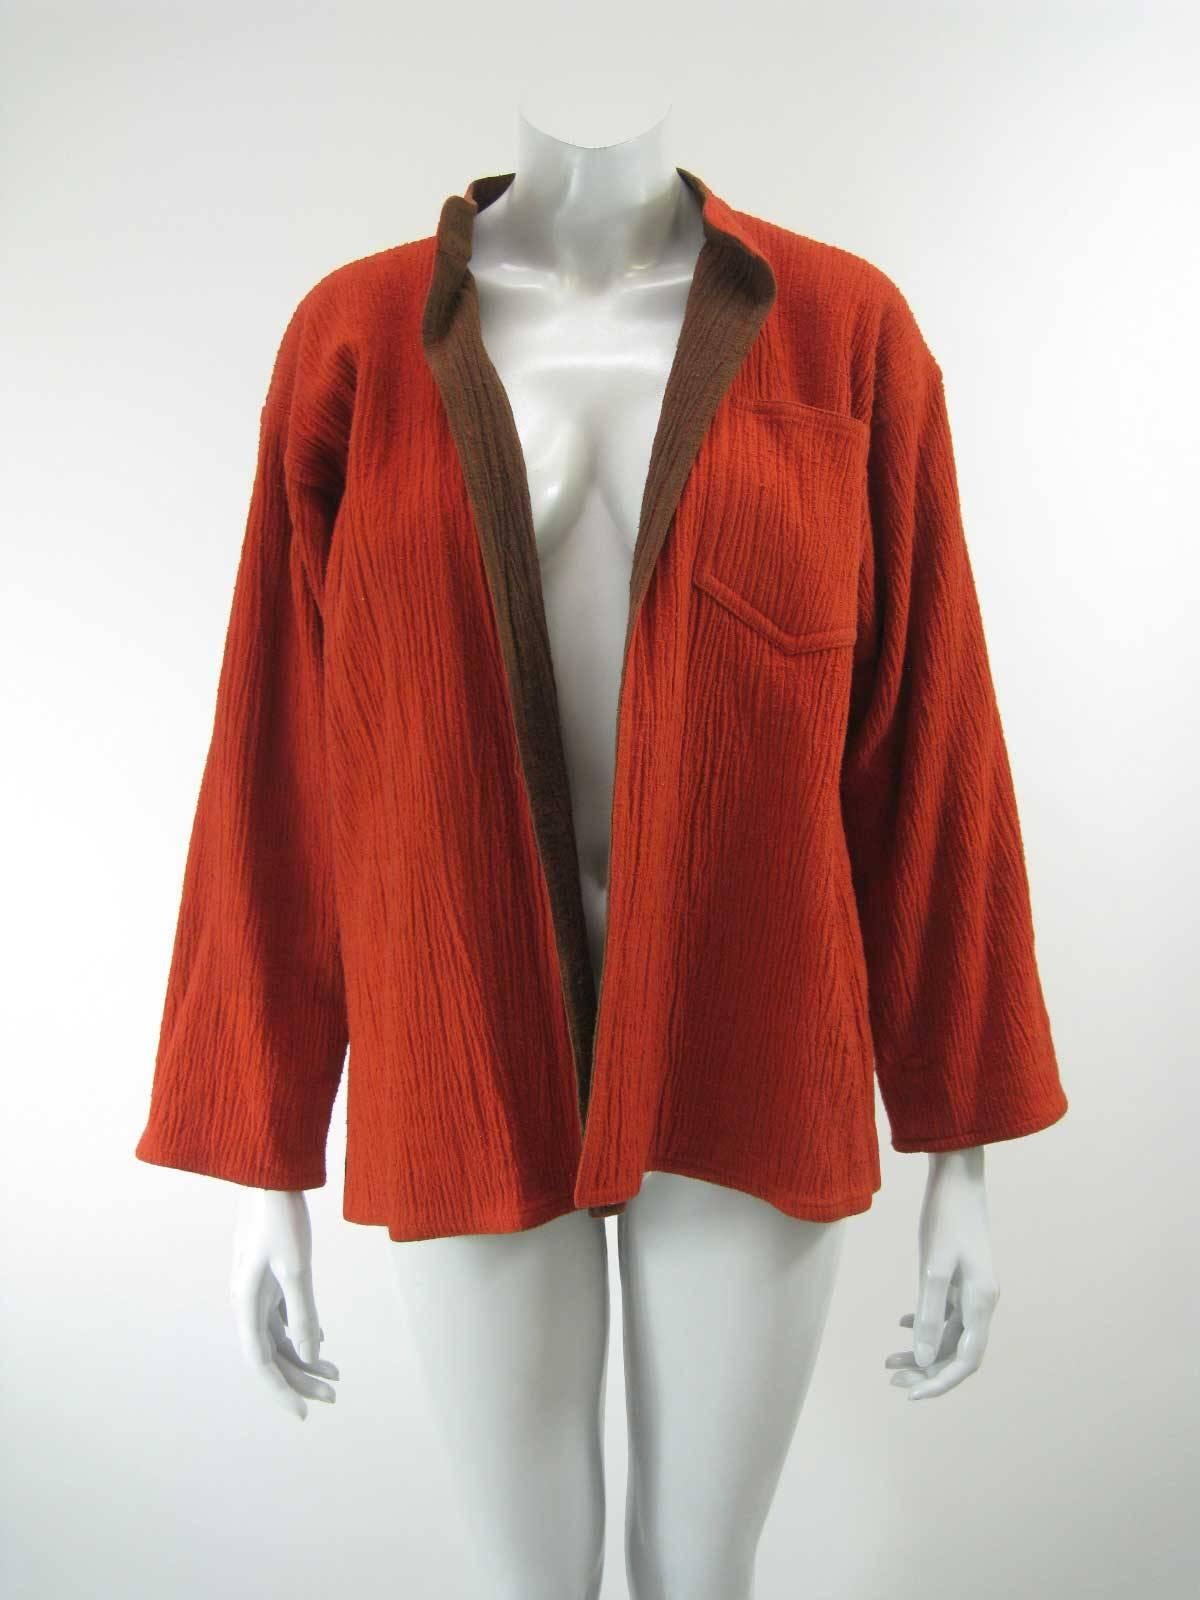 Very early vintage Issey Miyake jacket.

Contrasting colors of orange and brown.

Can be worn cuffed or not.

Large chest pocket.

Loose, Japanese style open shape with no closures.

Upright collar.

Cotton crinkled fabric. 

This item is in good